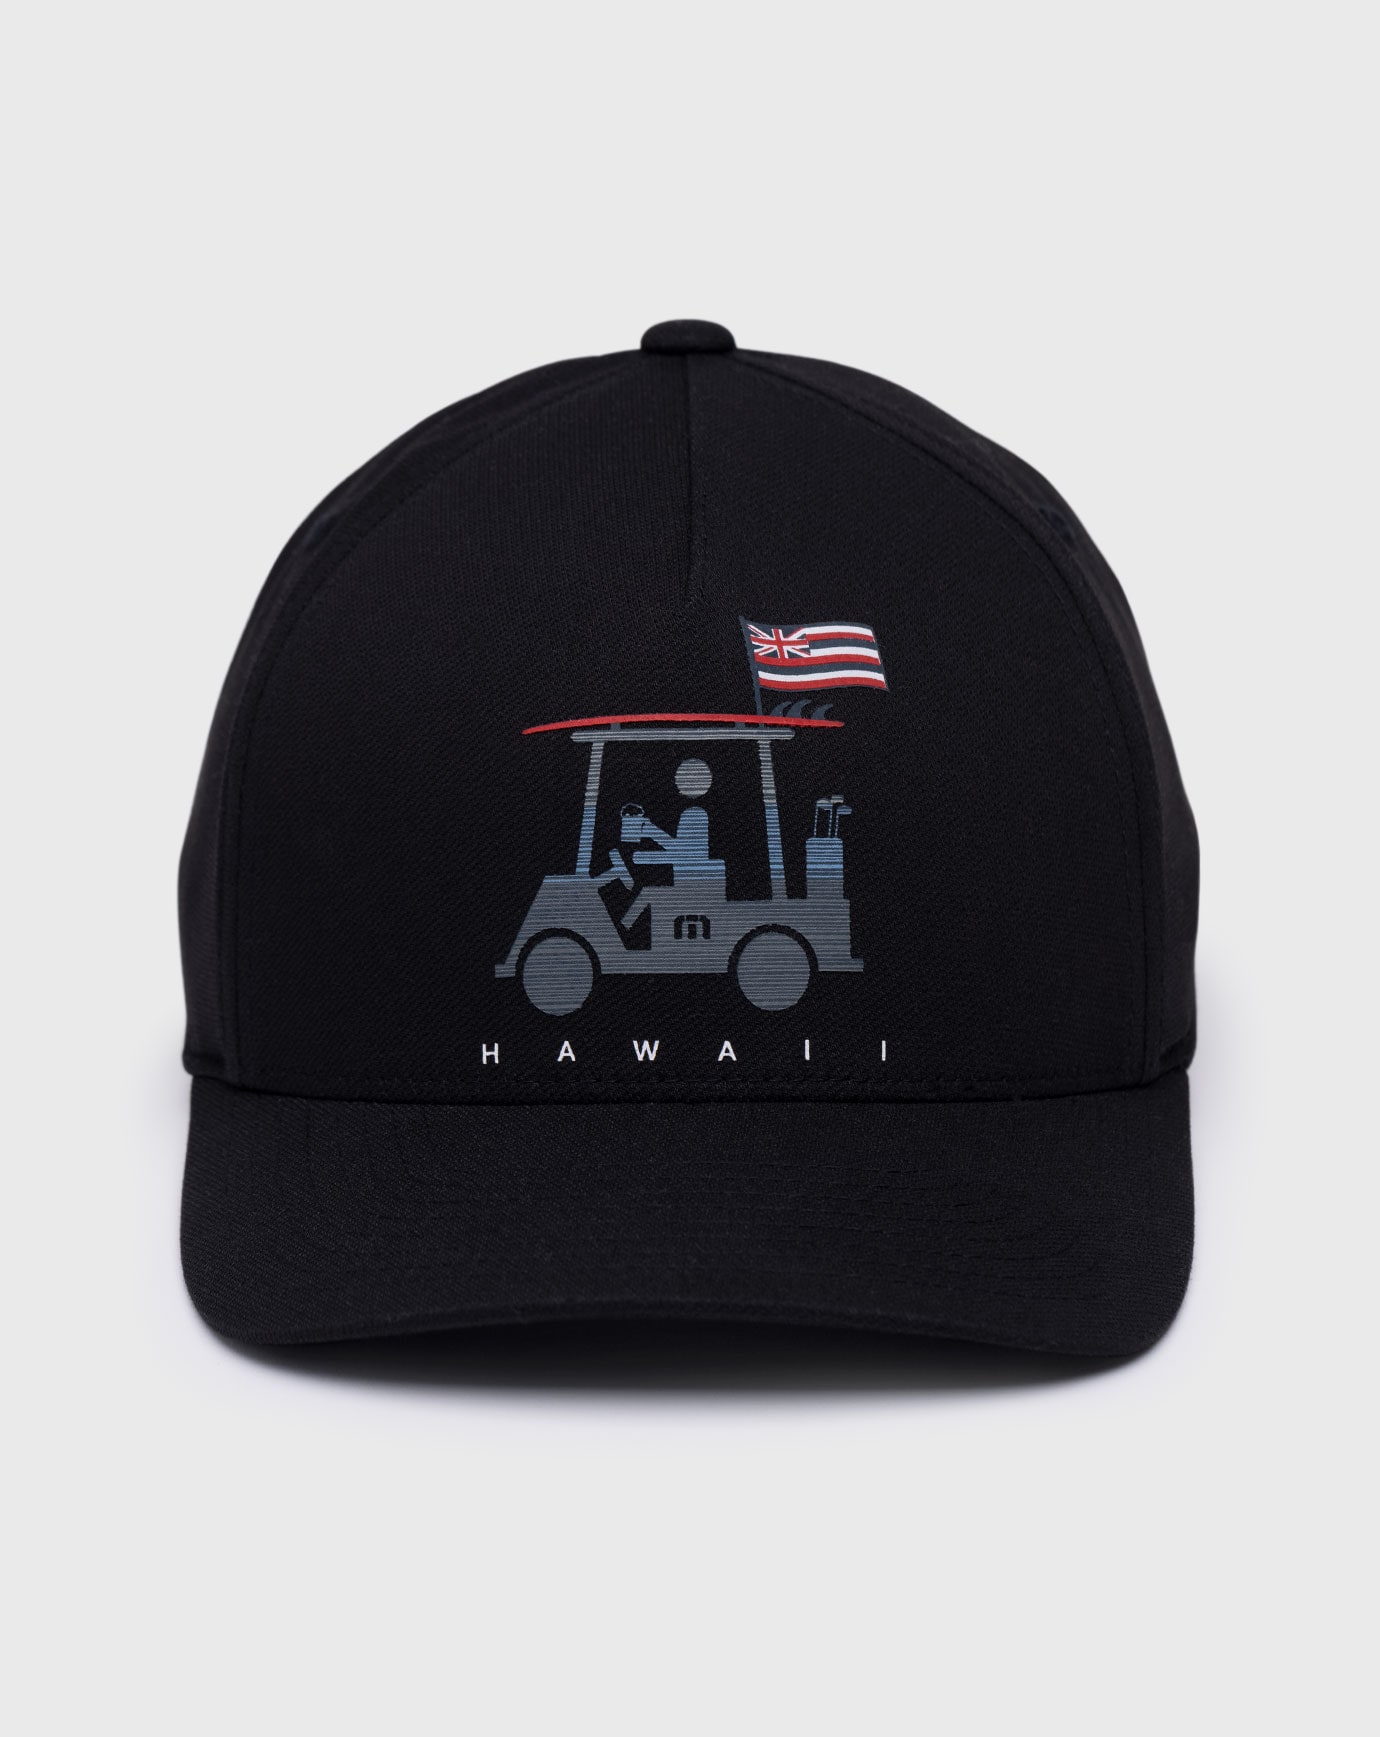 Related Product - NORTHERN POINT SNAPBACK HAT